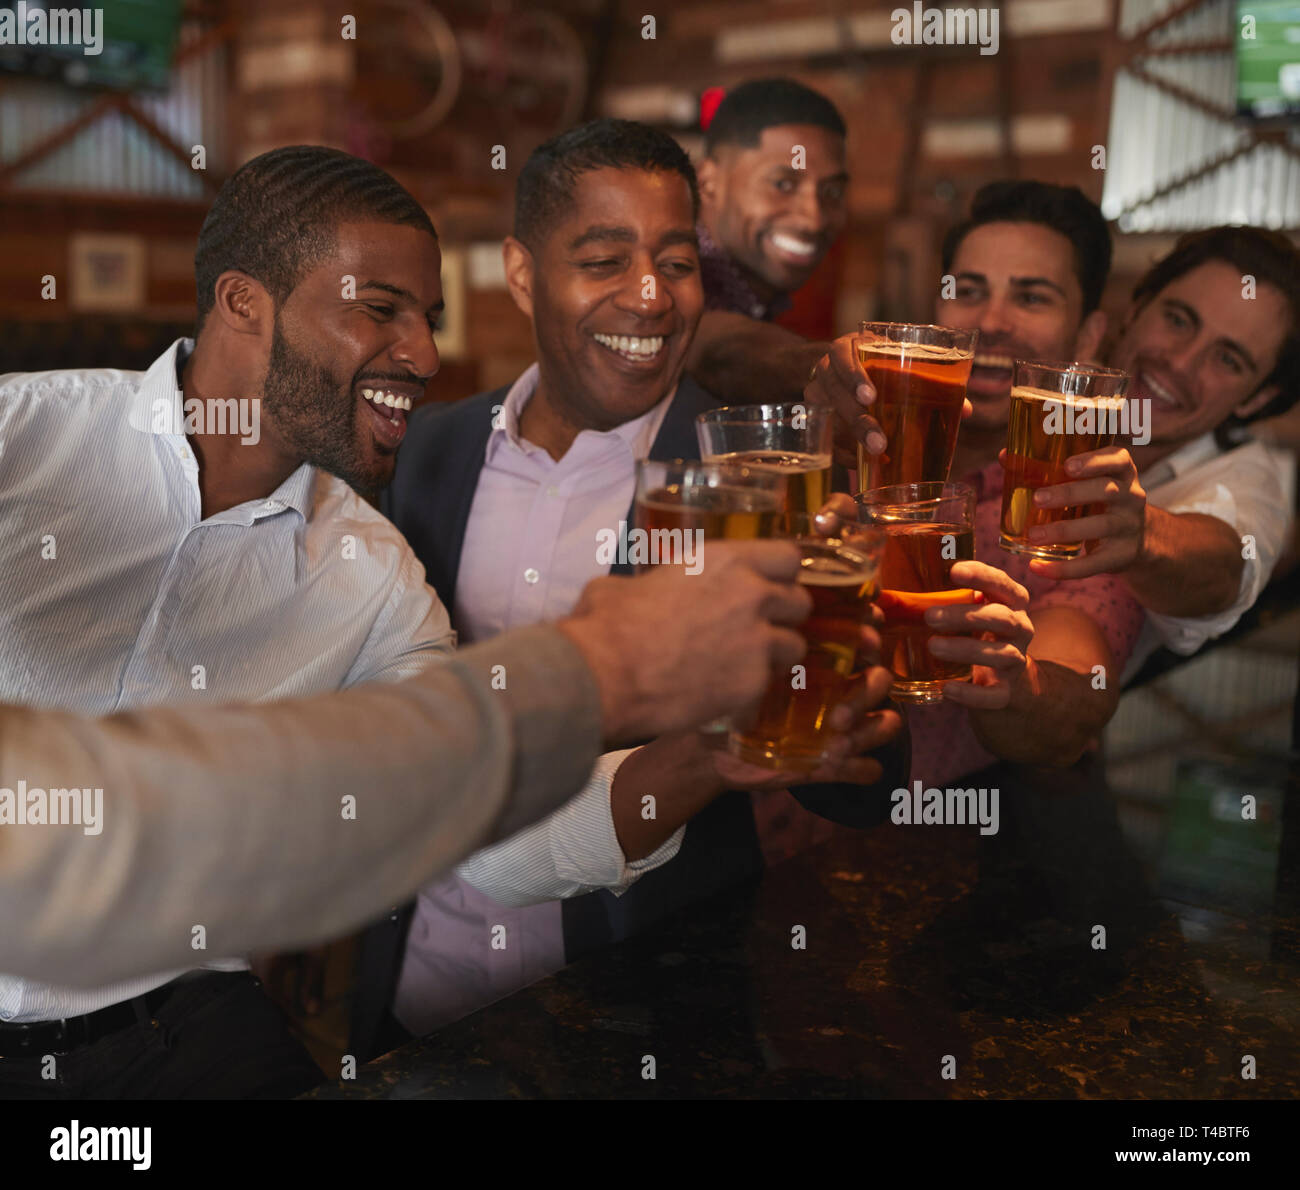 Group Of Male Friends On Night Out For Bachelor Party In Bar Making Toast Together Stock Photo